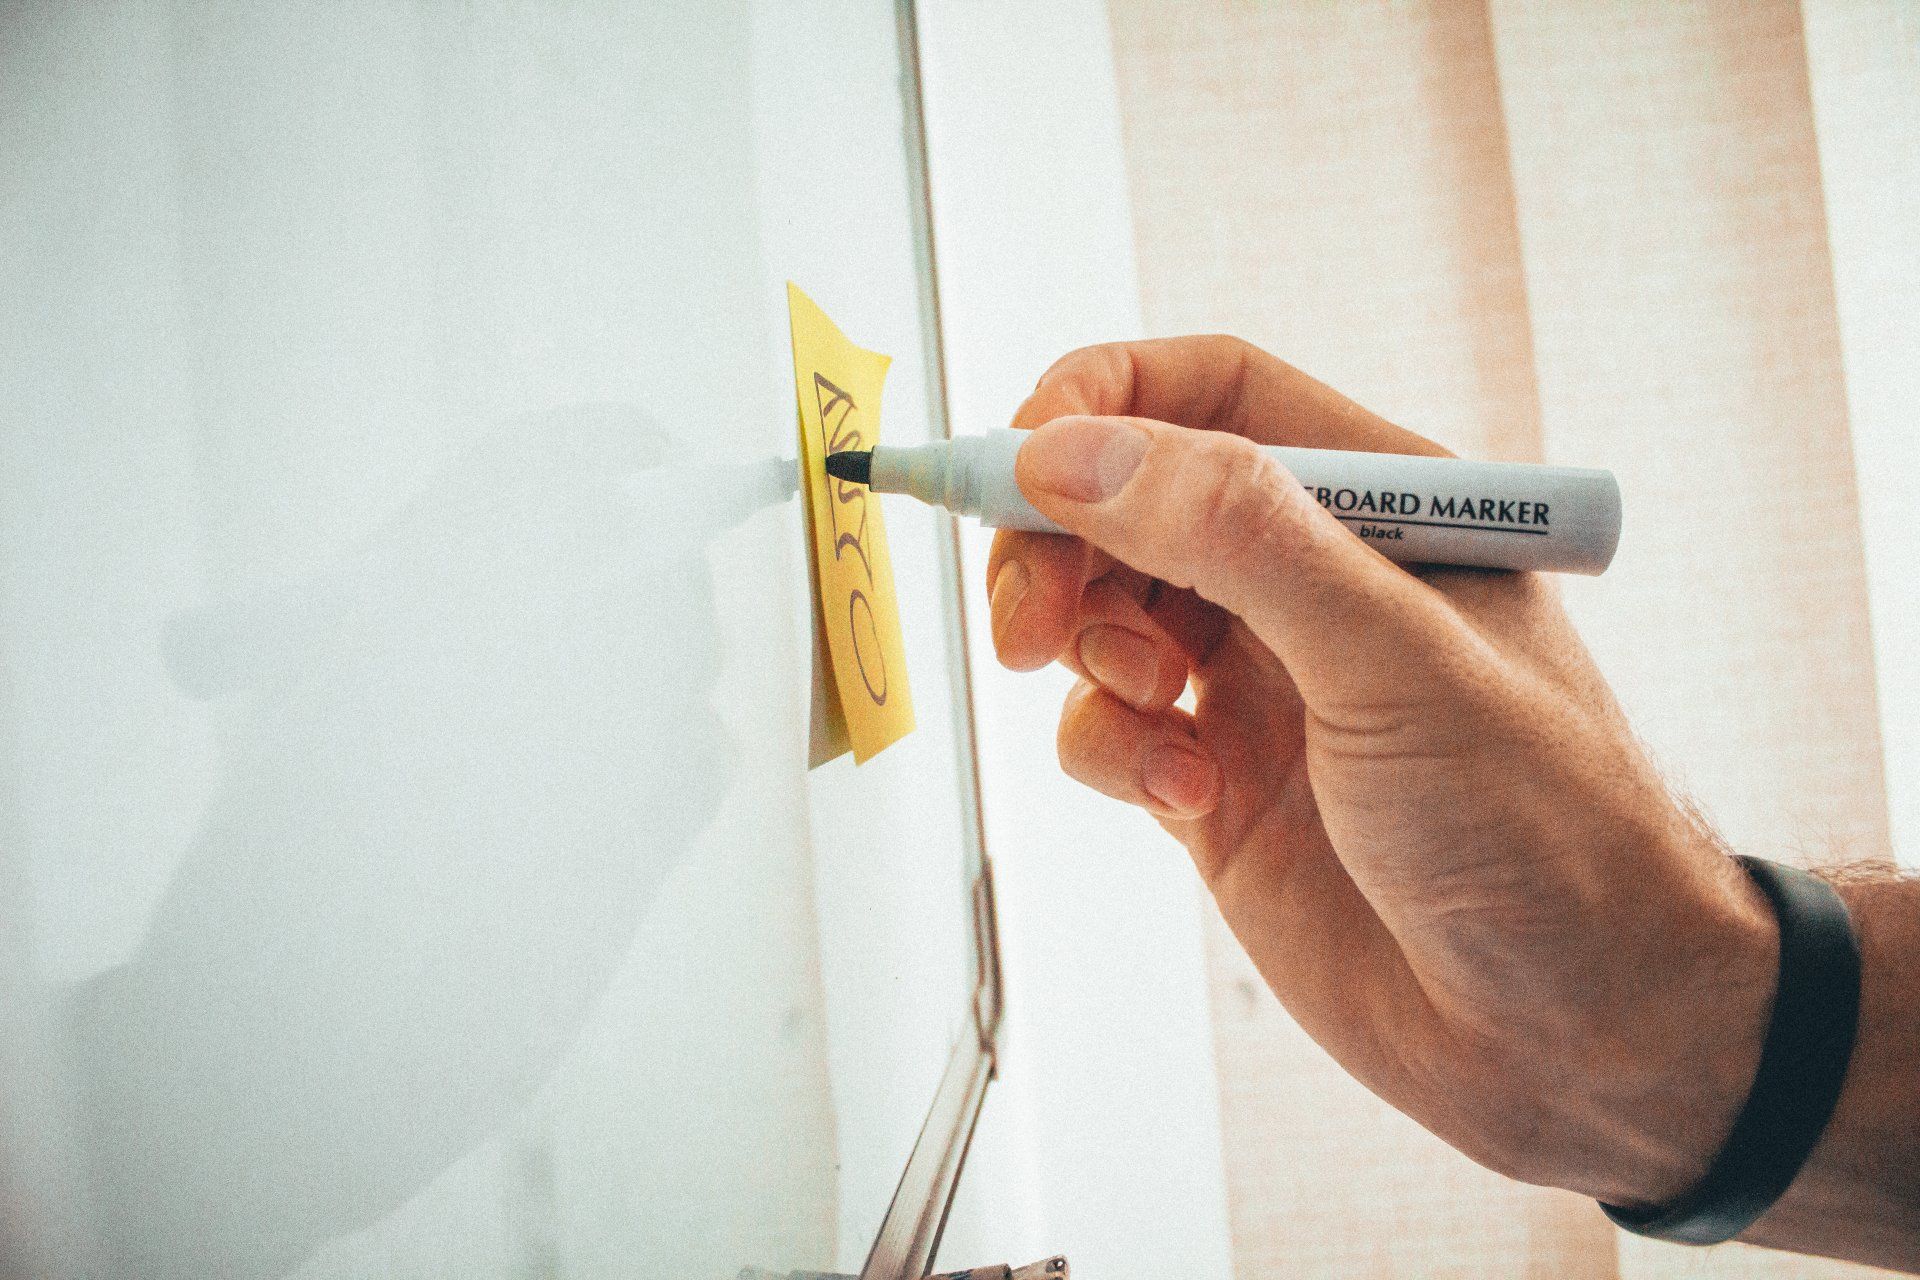 A person draws with a marker on a yellow sticky note attached to a whiteboard.